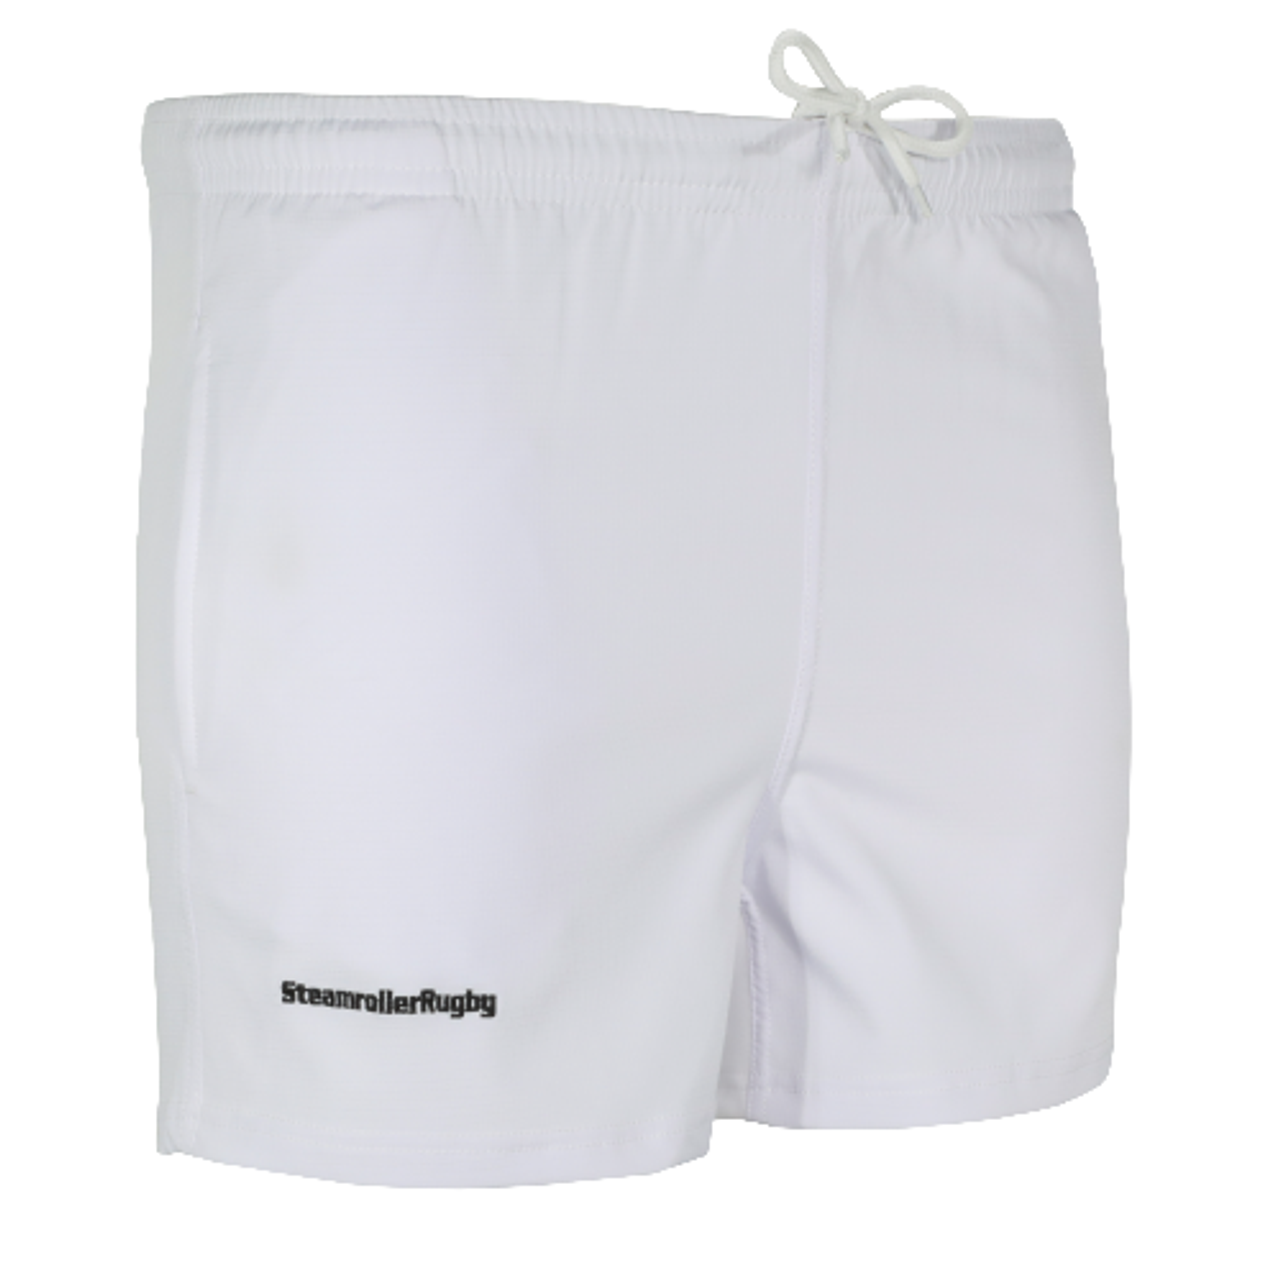 Rio Grande Referees Pocketed Performance Rugby Shorts, White